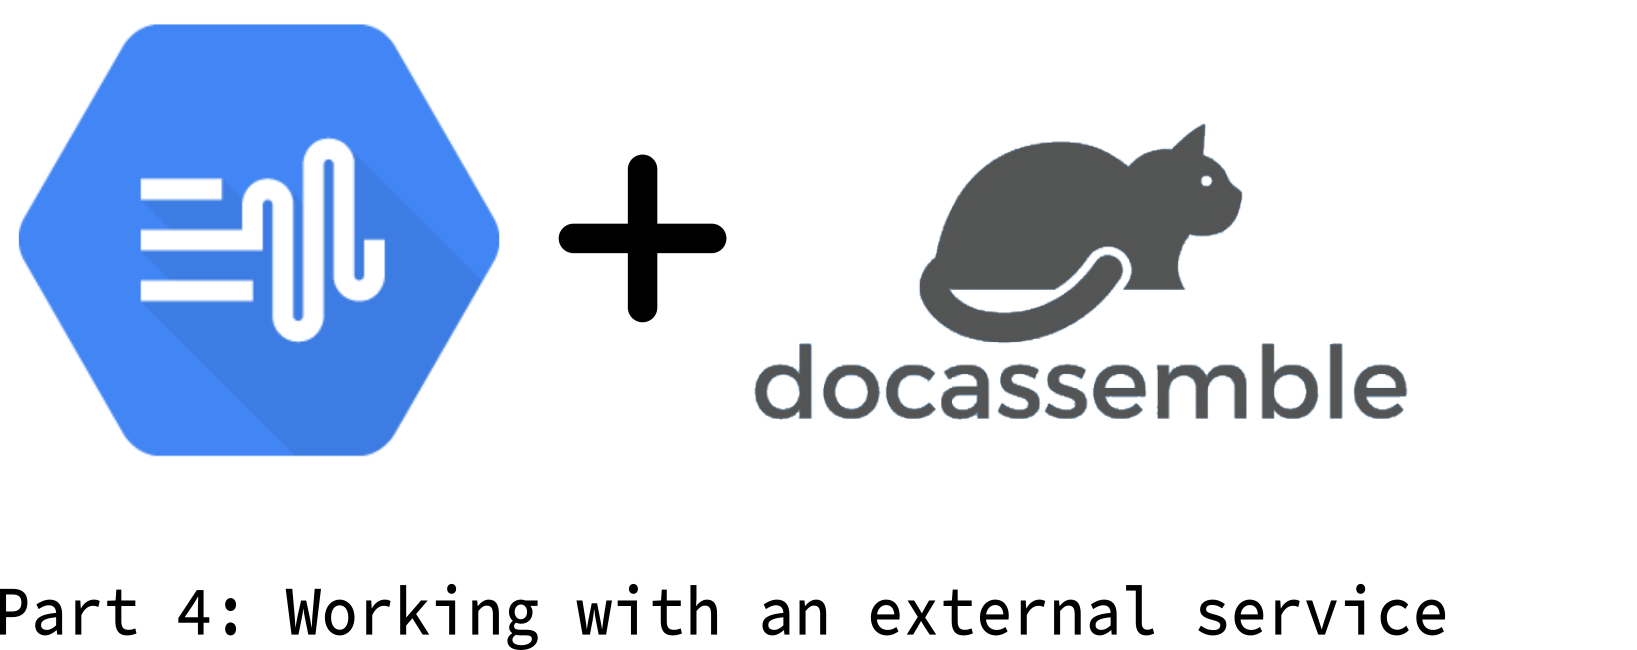 [Part 4] Do more with docassemble: Calling Google Text To Speech 🎺